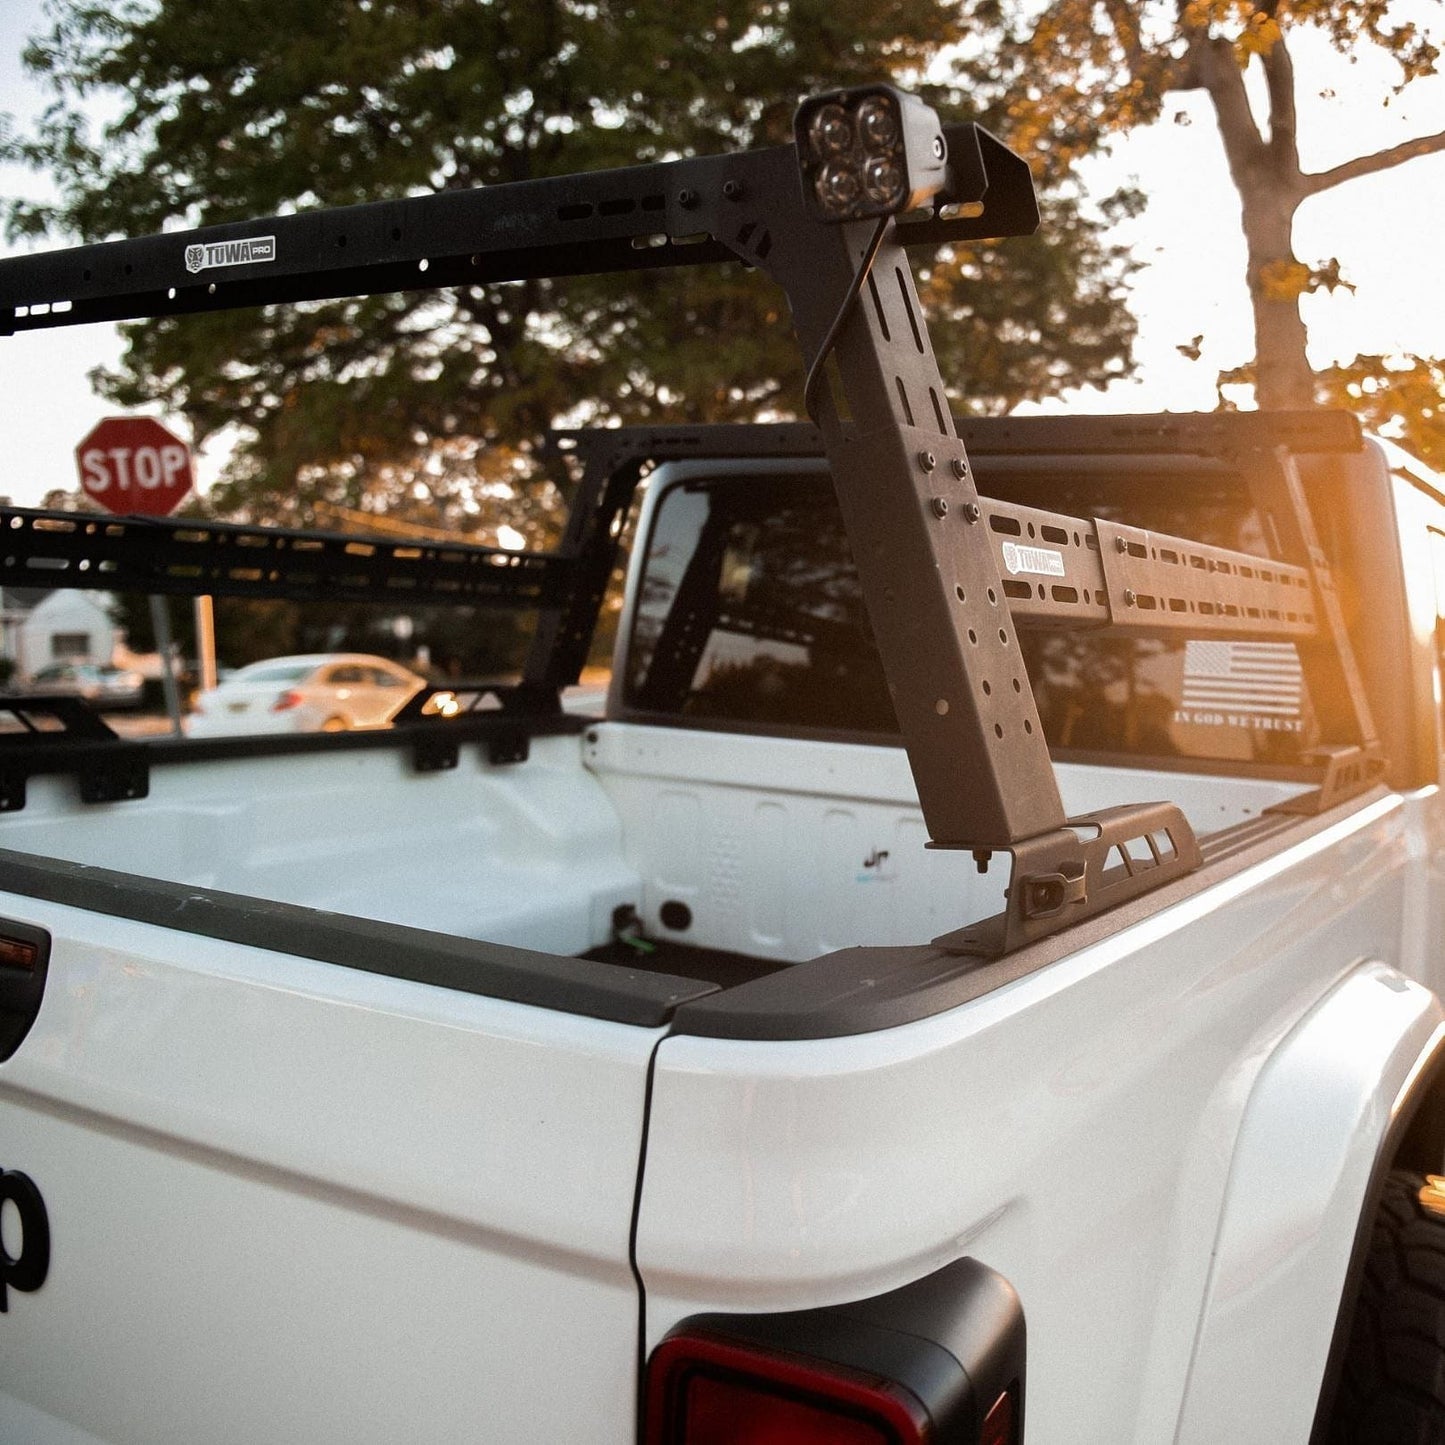 Jeep Gladiator Mesa Verde Bed Rack System-Offroad Scout